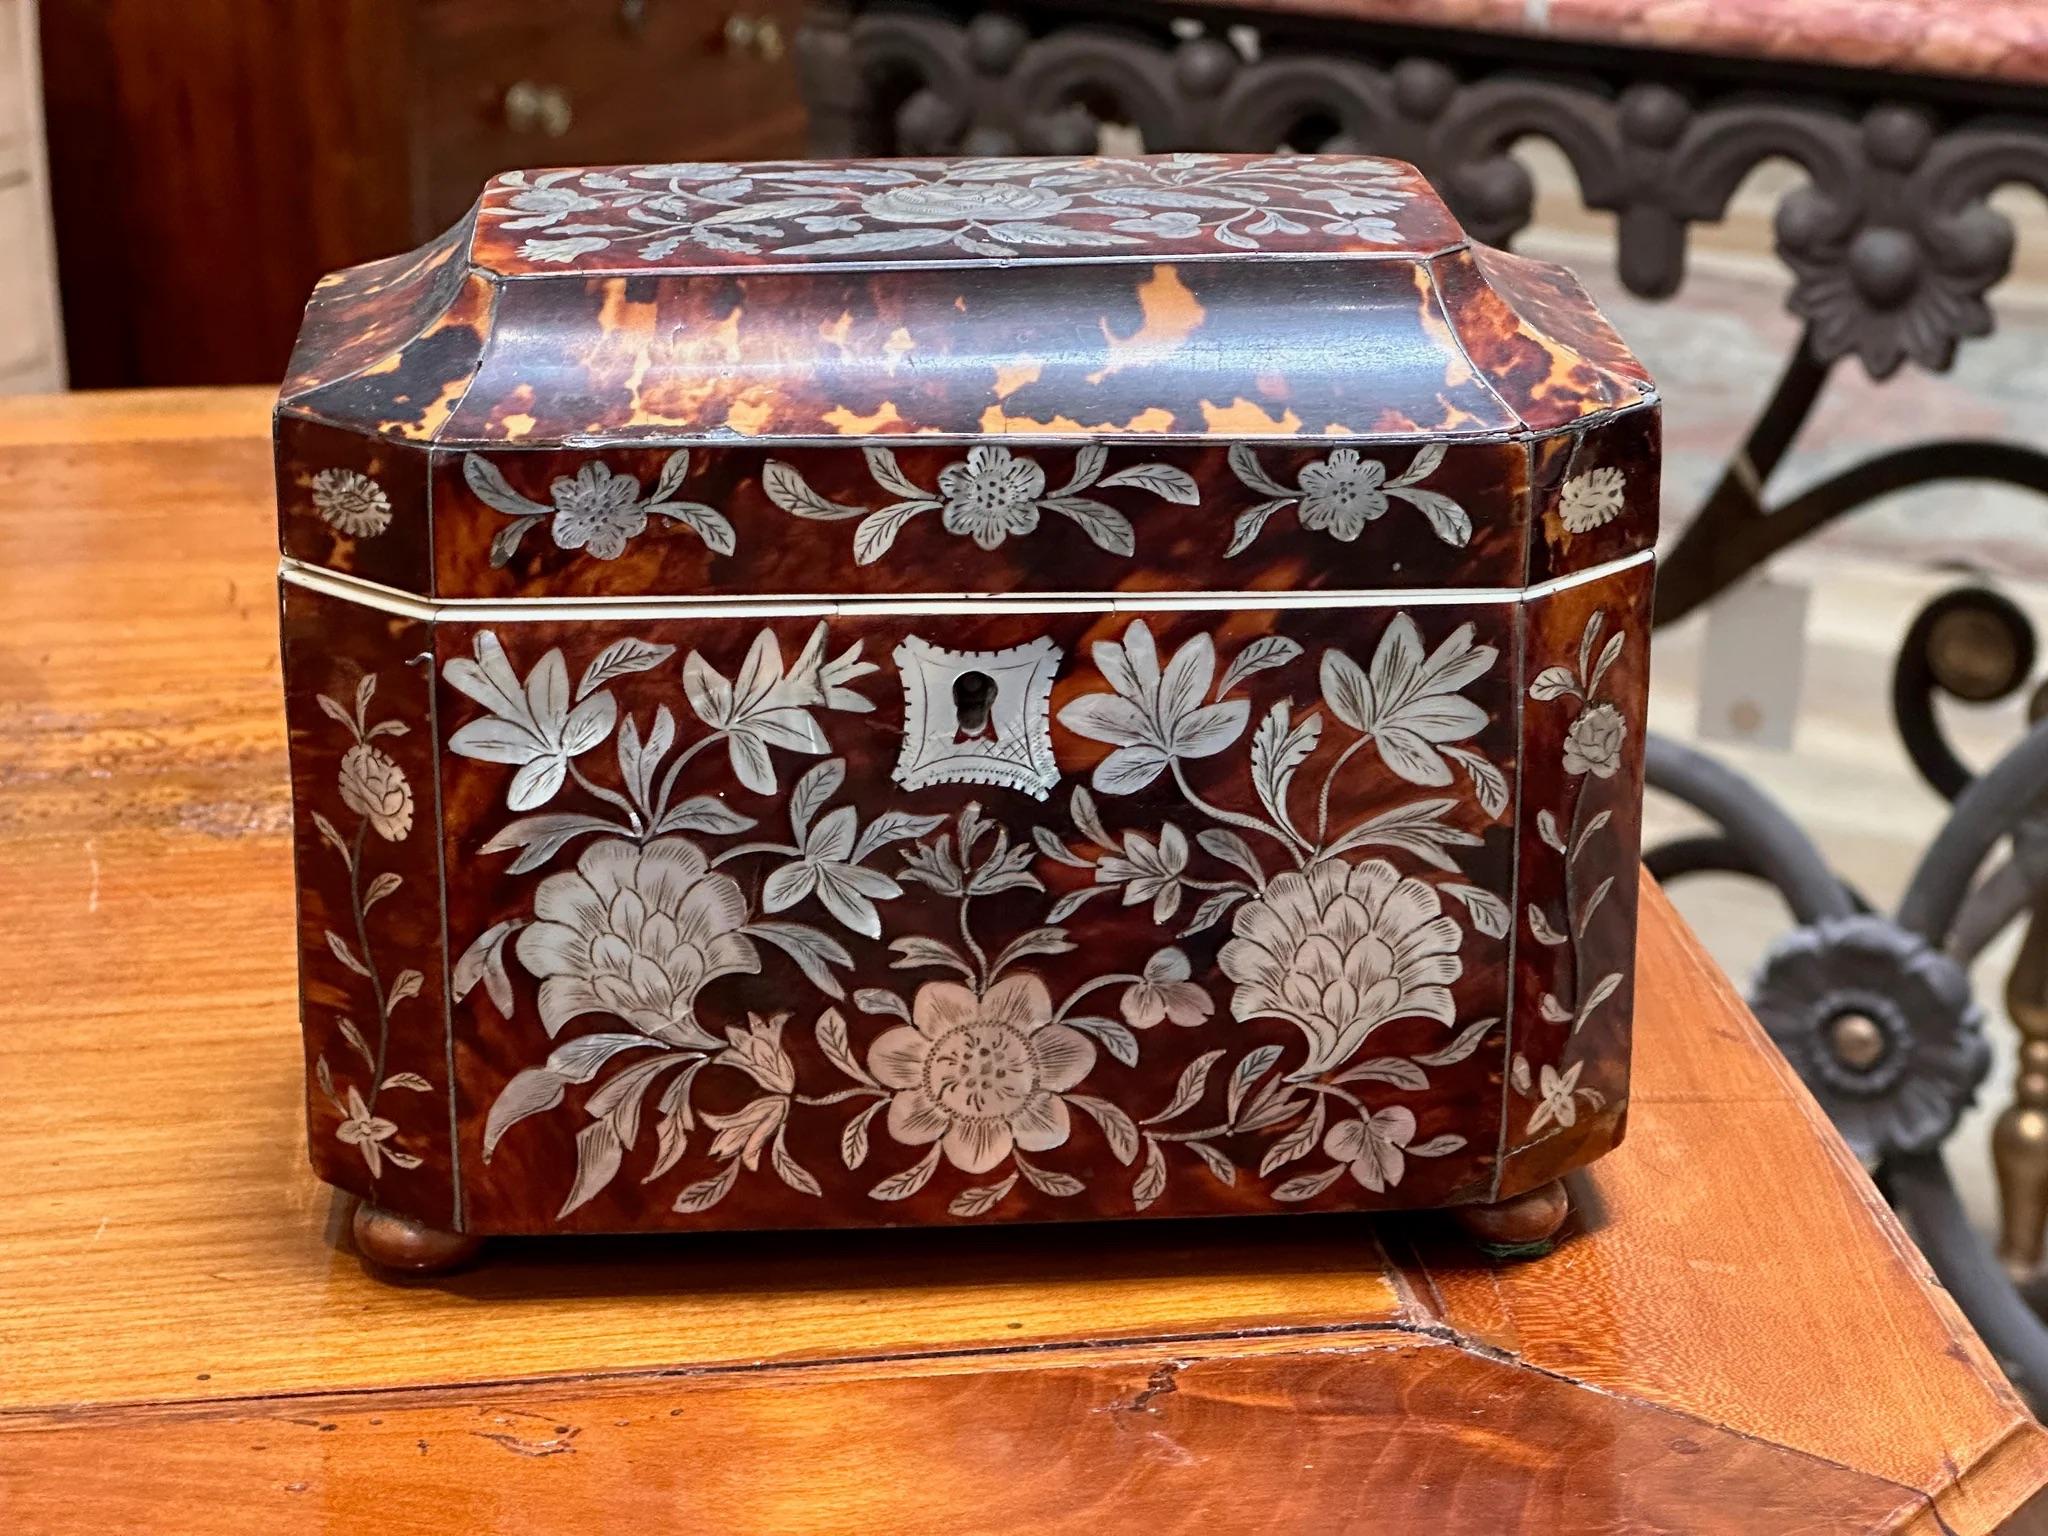 English Regency Period tortoiseshell tea caddy, having a stepped lid with canted corners, exuberant floral design mother-of-pearl marquetry inlaid lid and front panels, set on wooden bun form feet, velvet lined lid, two interior lidded compartments,